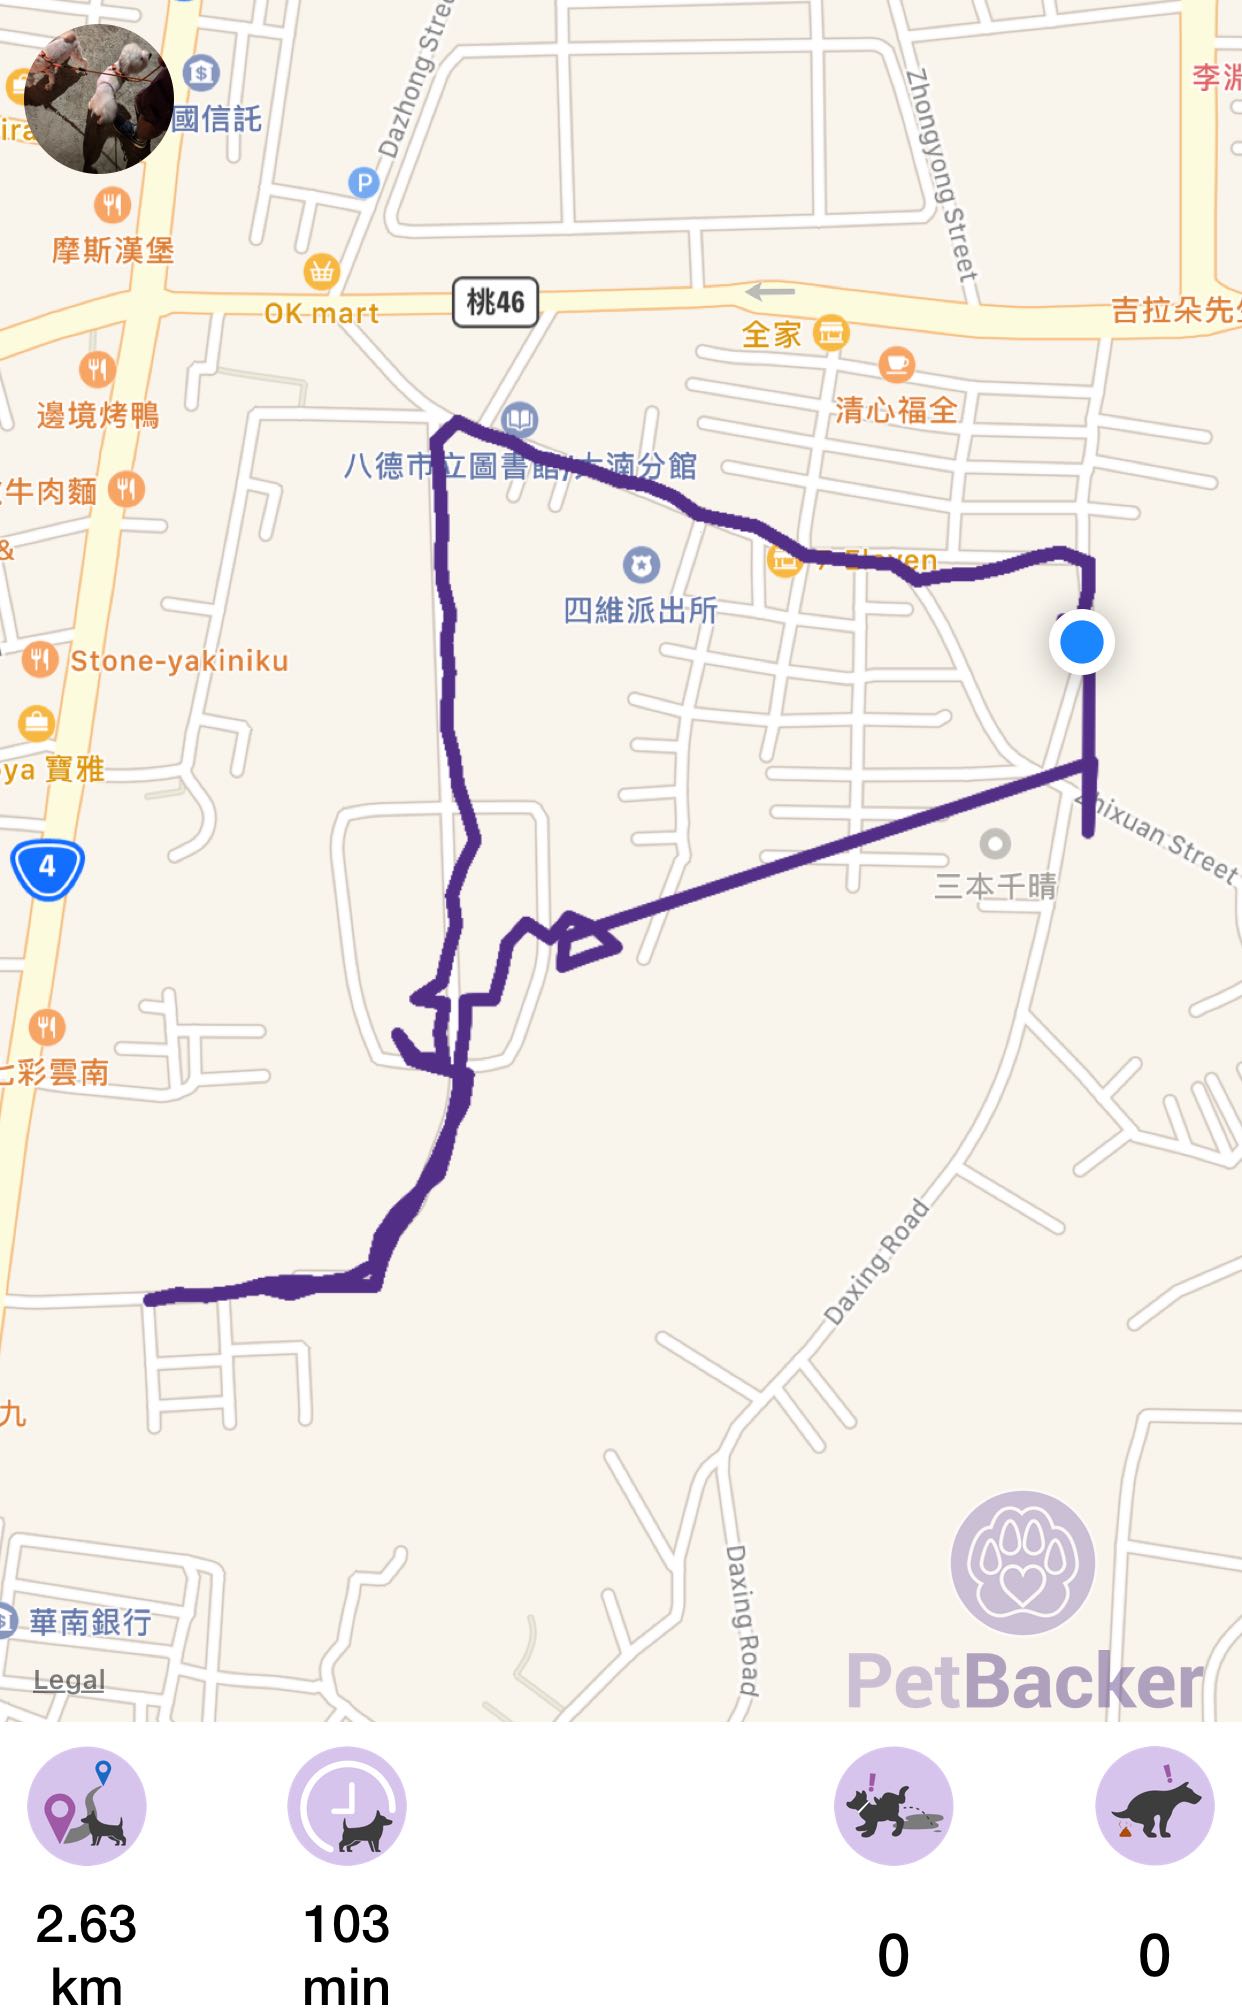 Just completed pet walking of 2.63 km